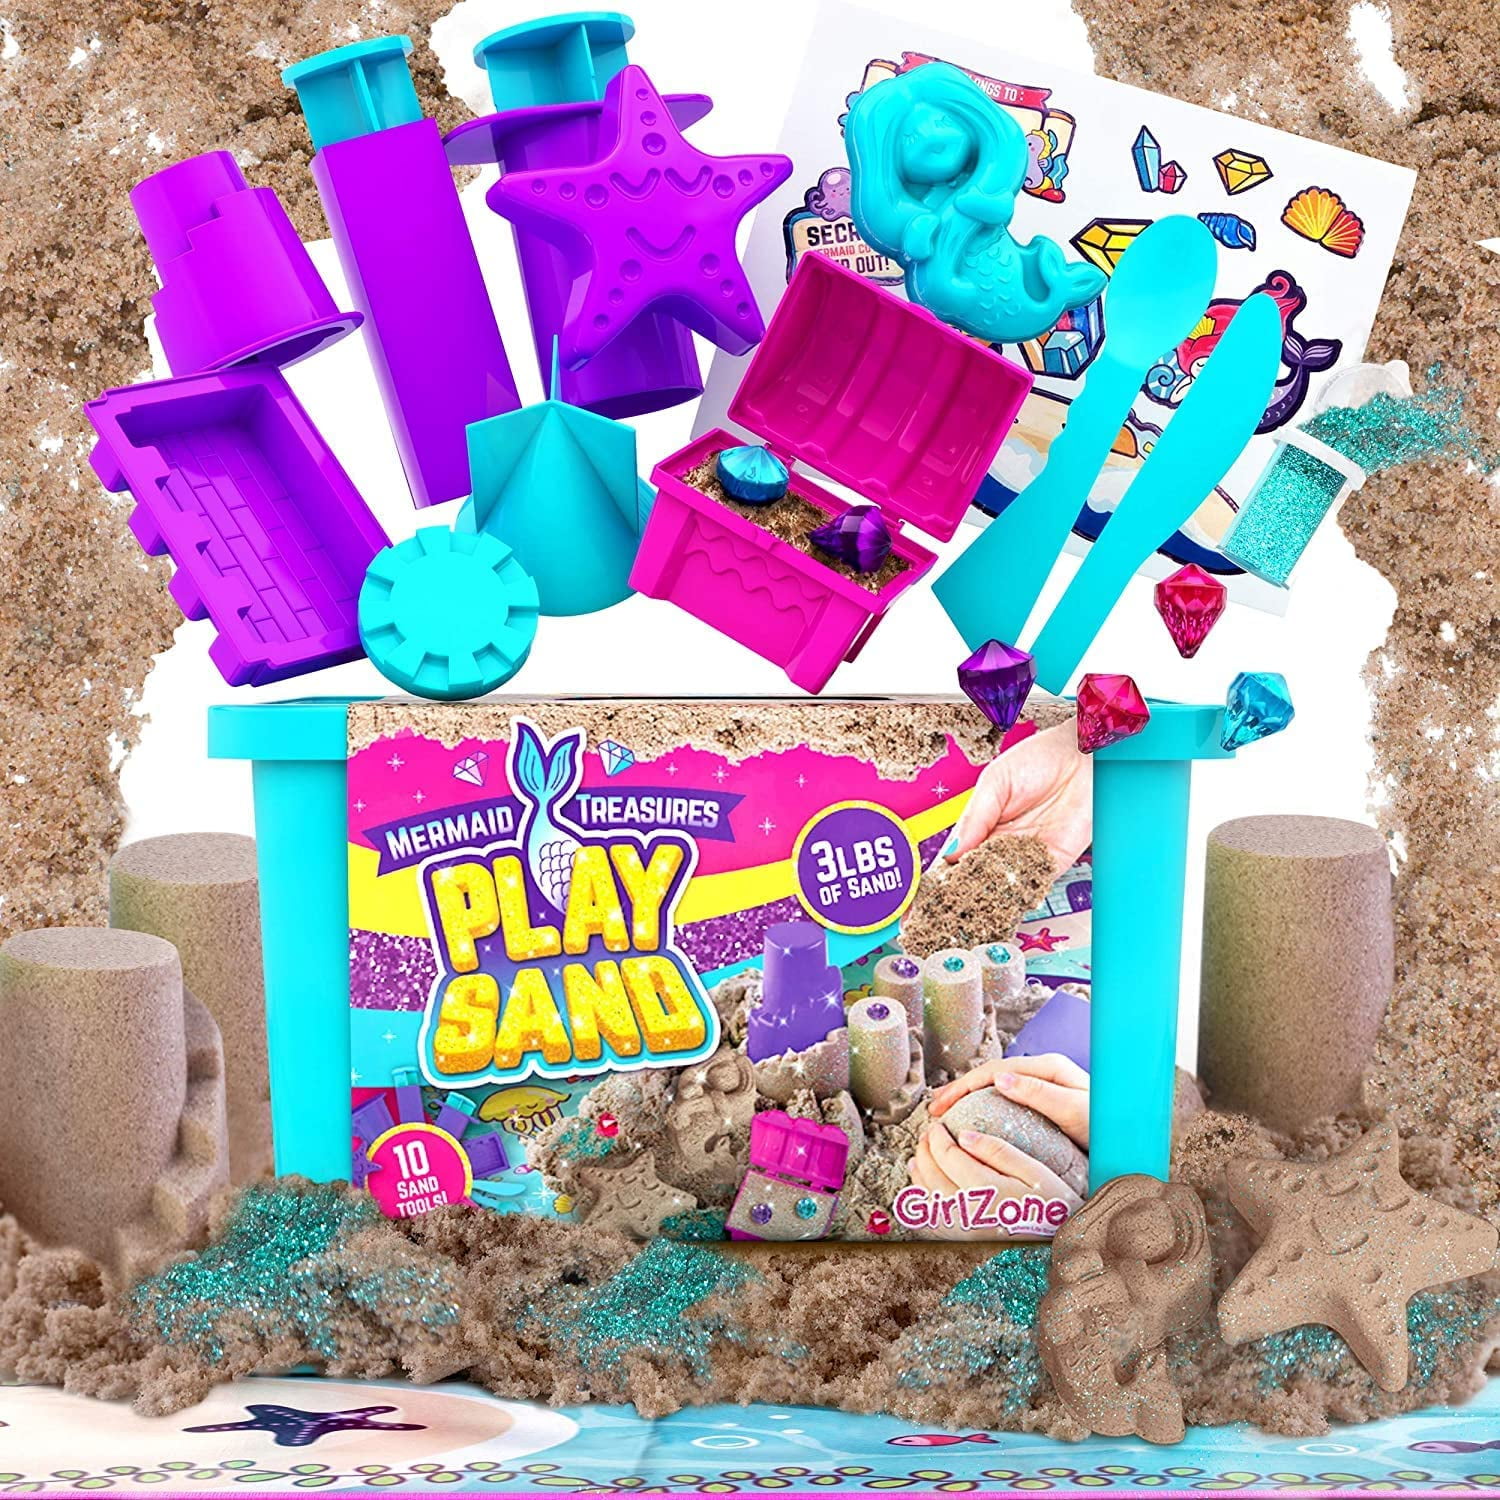 USA Toyz City Theme Sand Molds Kit With Mess Tray 28 Pieces 641871785032 for sale online 